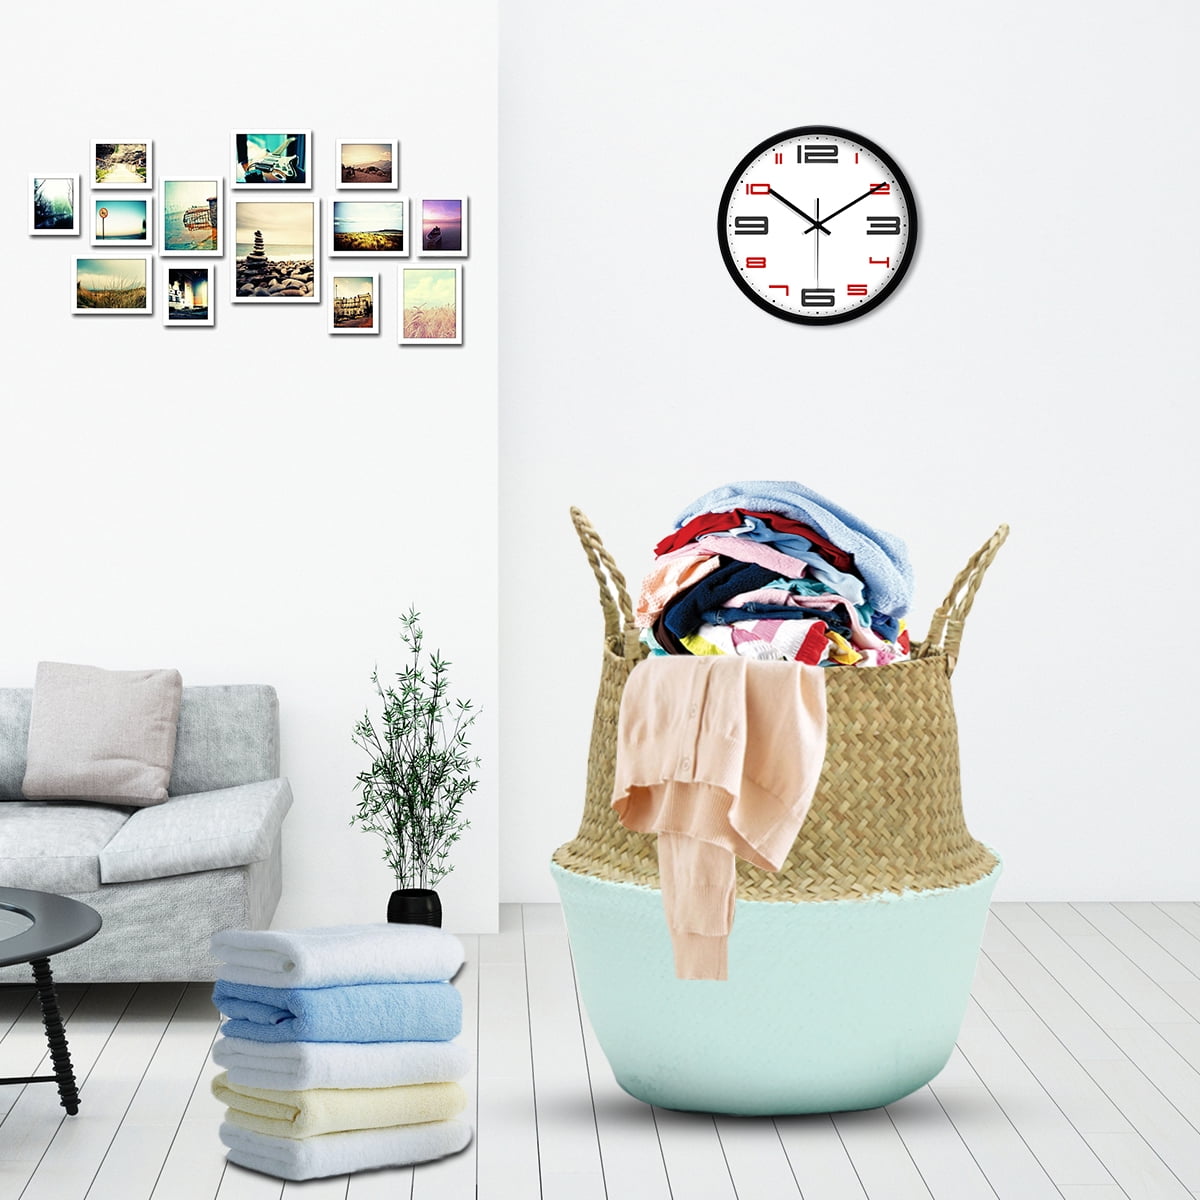 Details about   Seagrass Belly Basket Storage Plant Pot Foldable Nursery Laundry Bags Home Decor